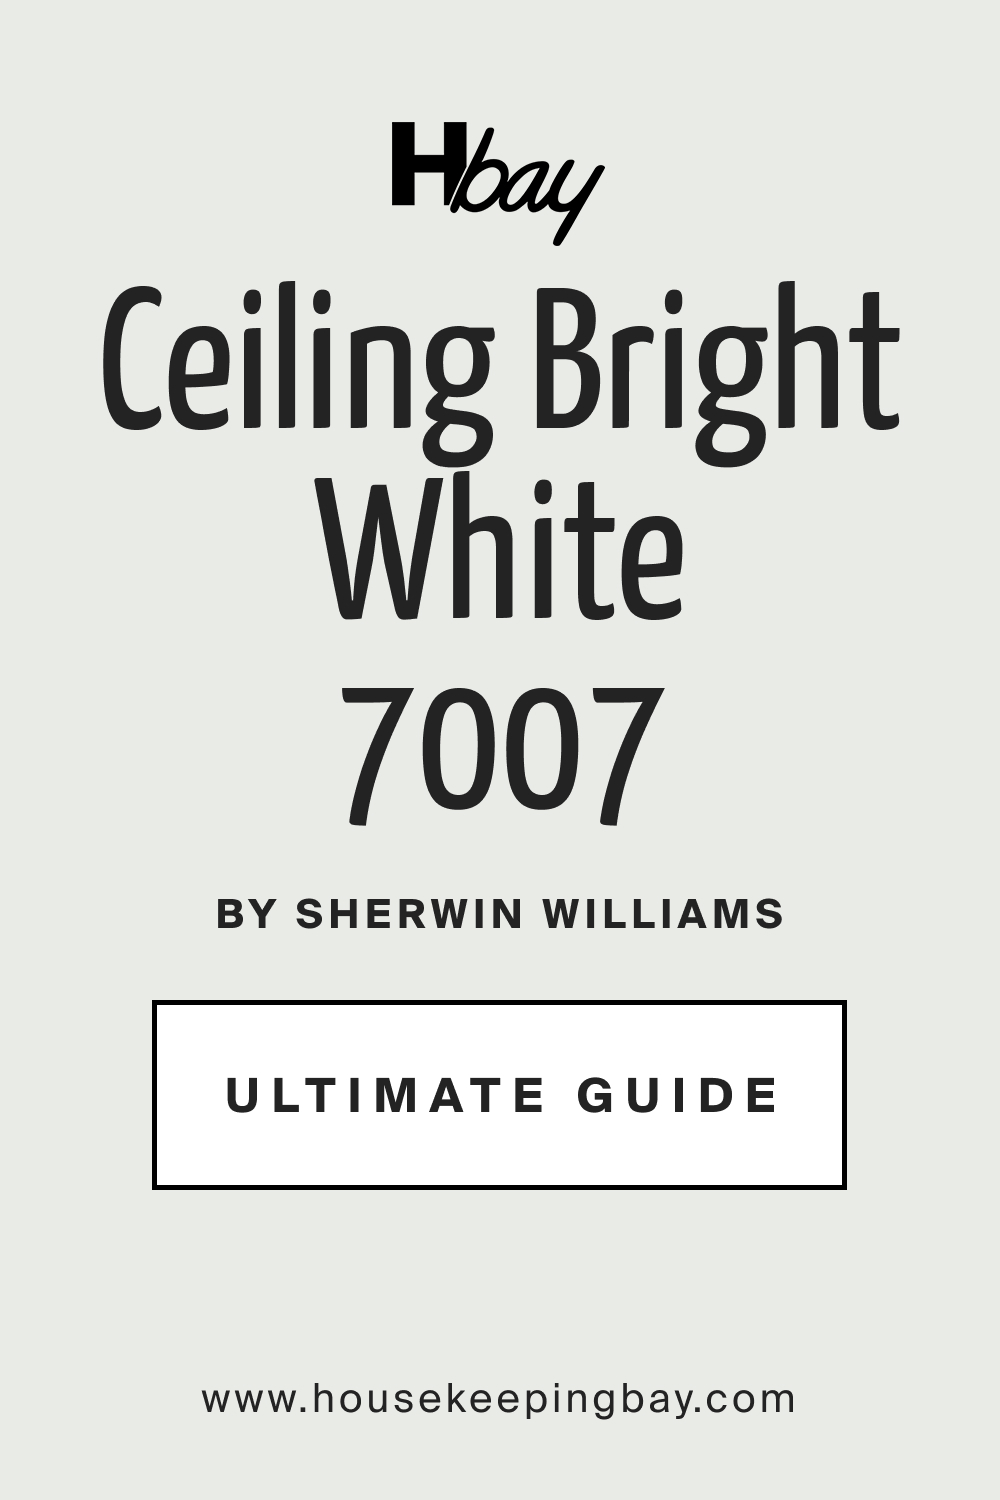 Ceiling Bright White SW 7007 by Sherwin Williams Ultimate Guide